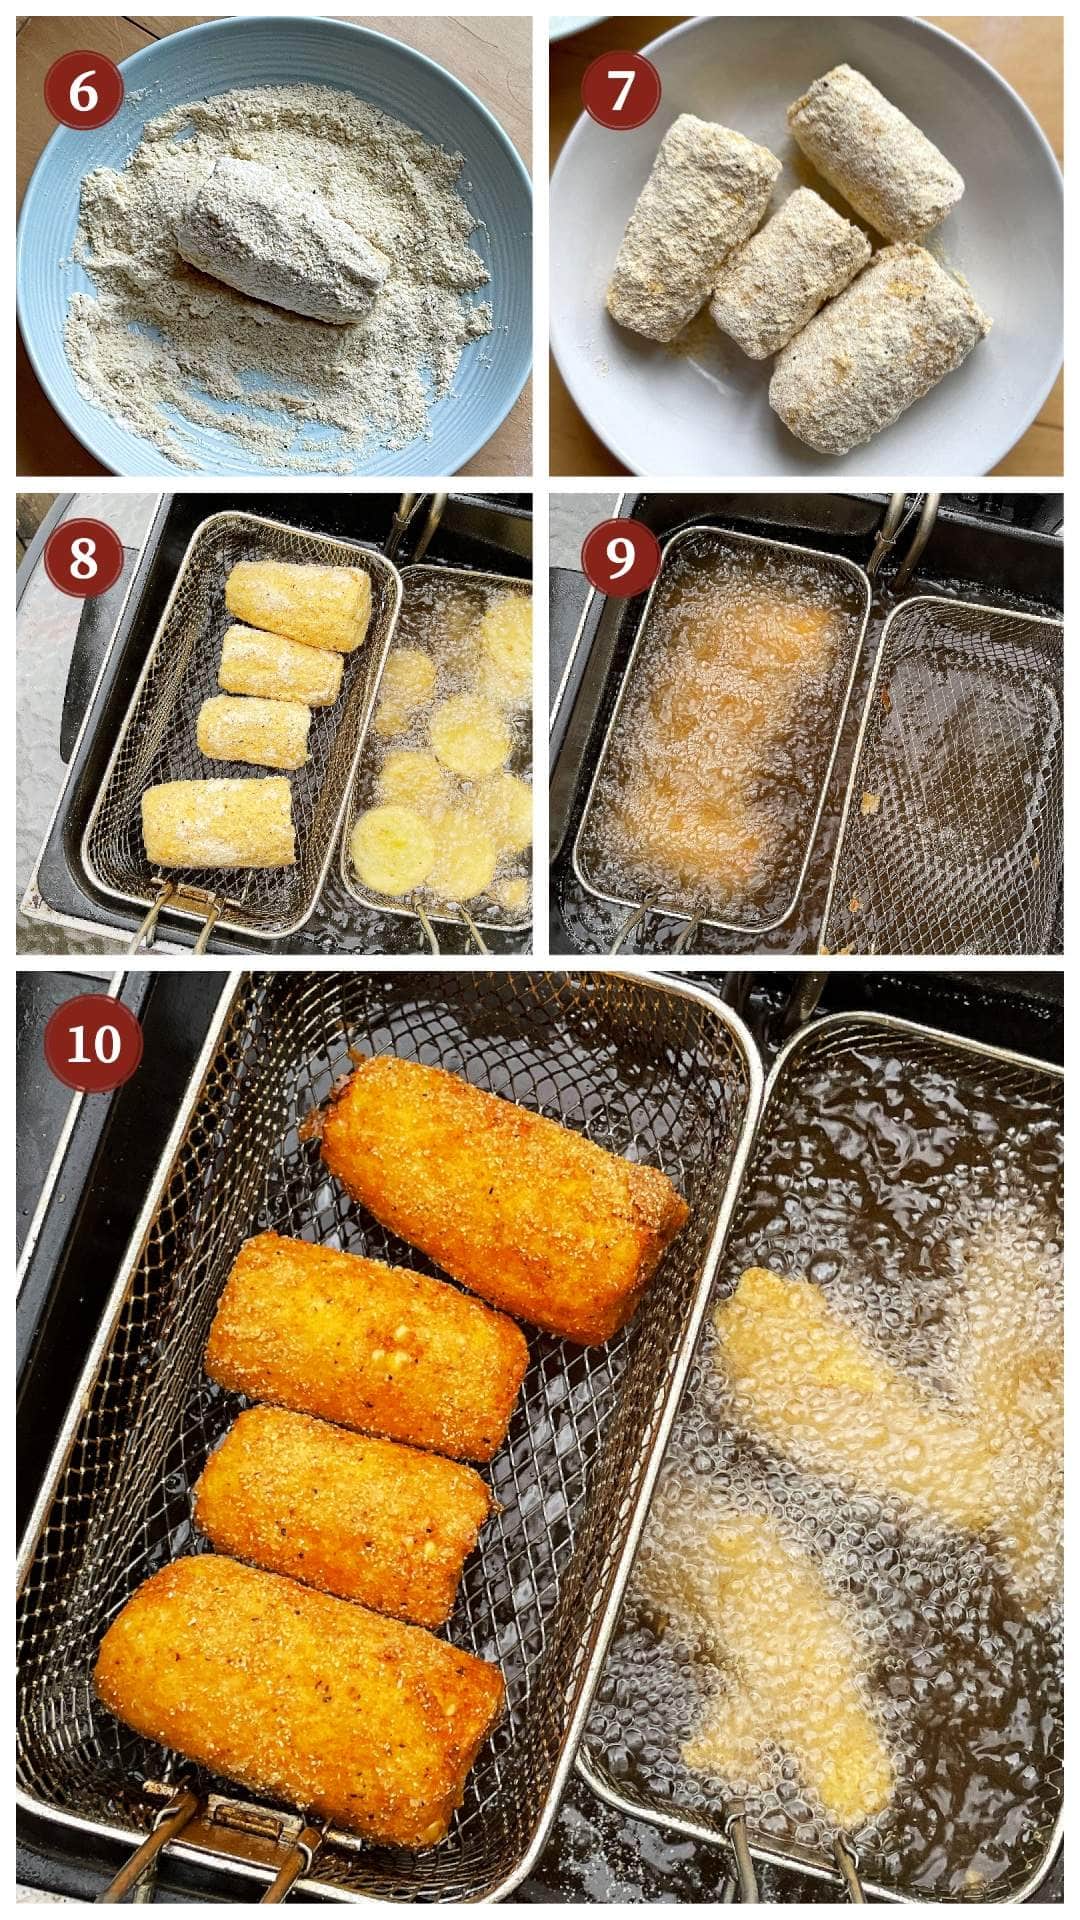 A collage of images showing how to make deep fried corn on the cob, steps 6-10.